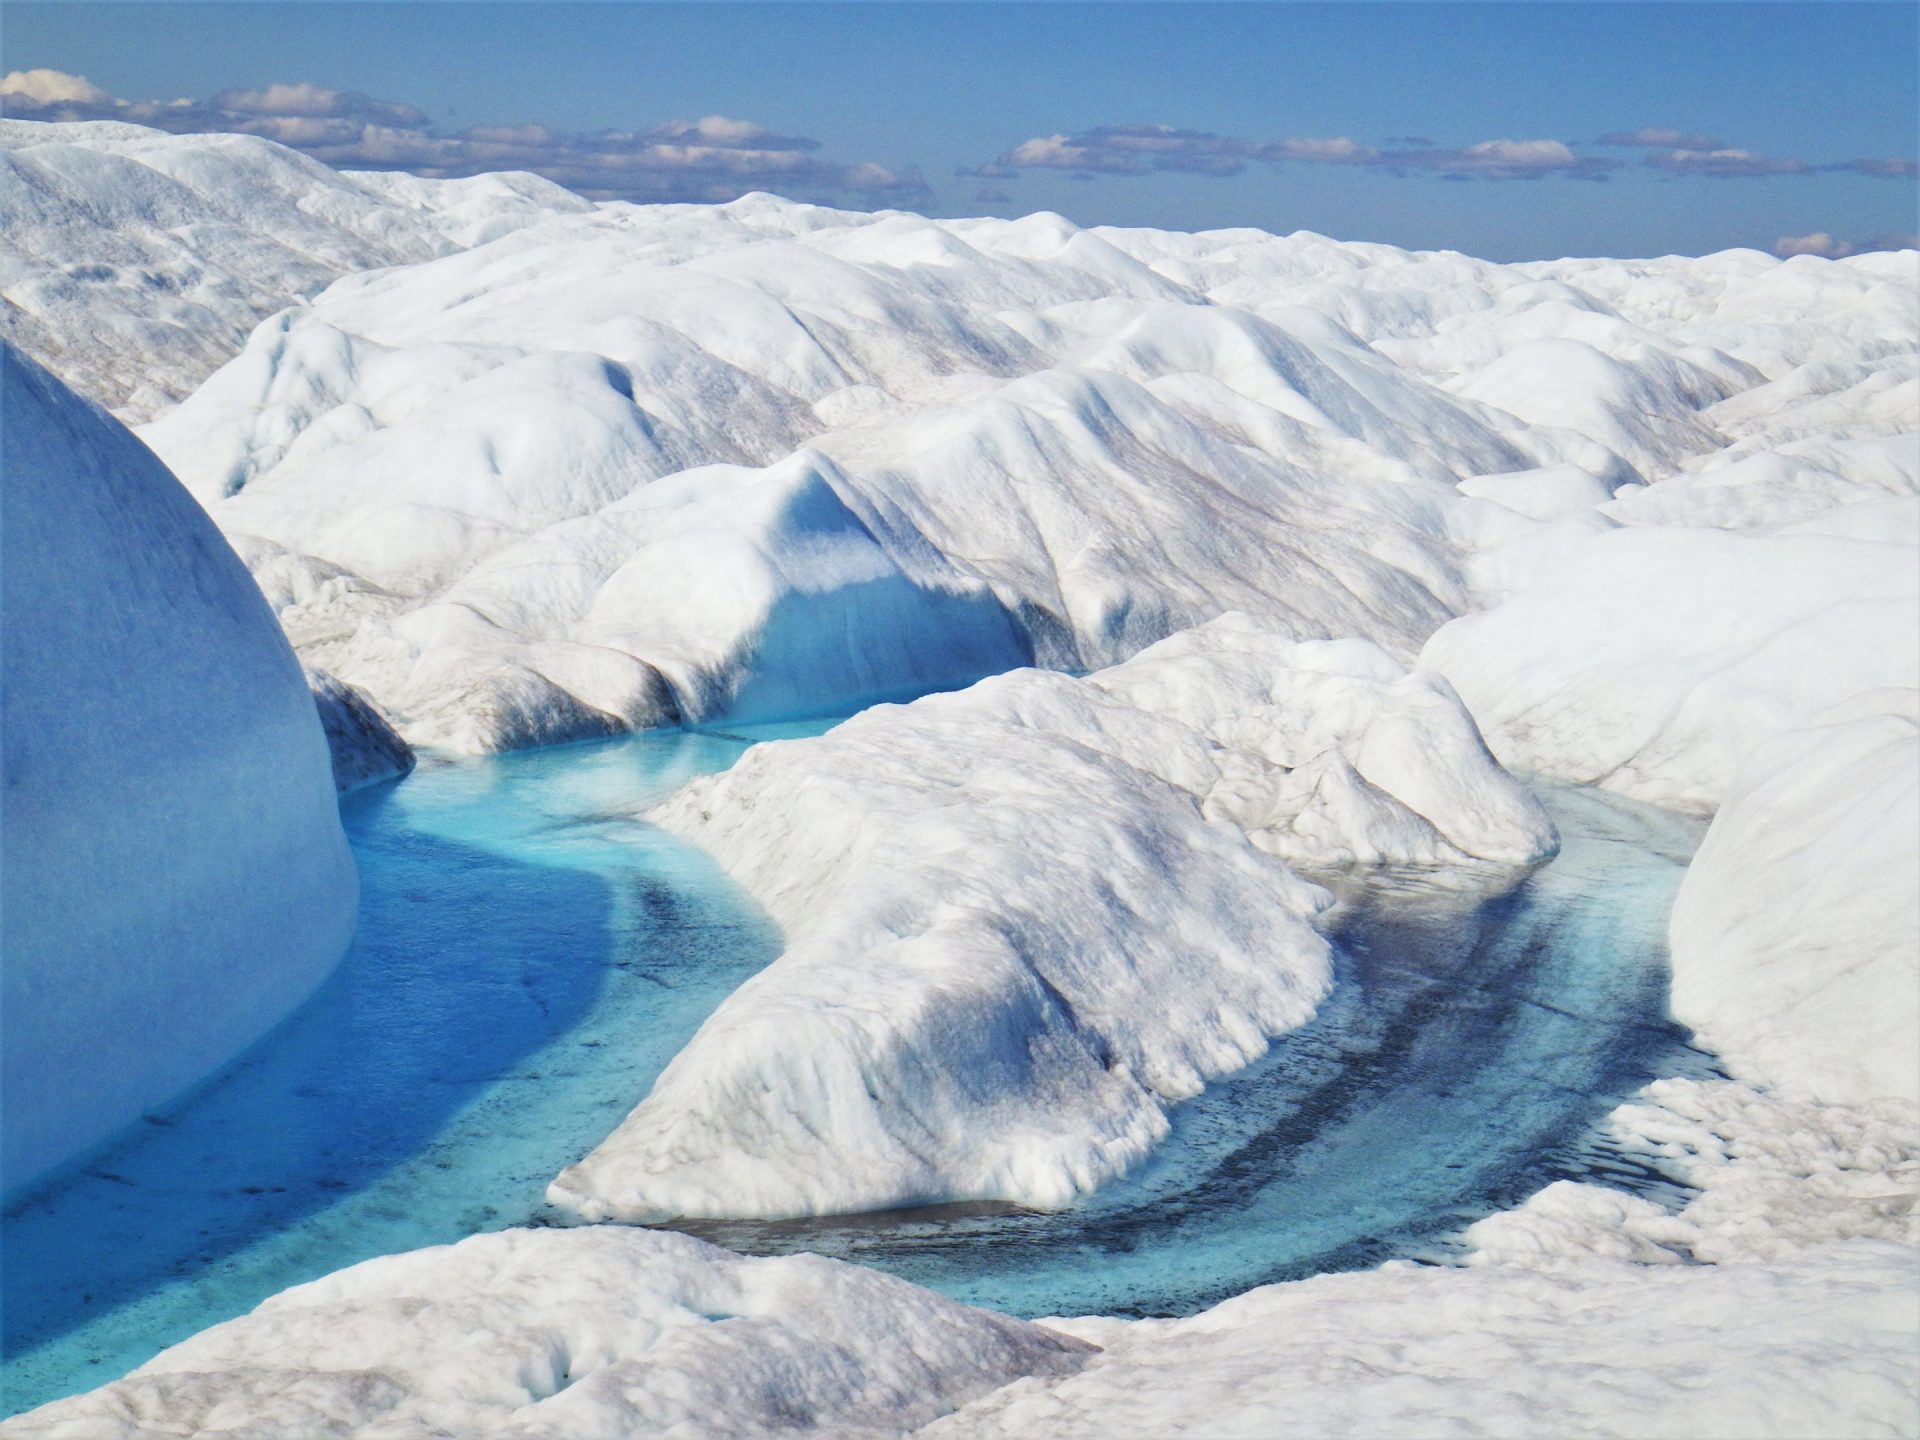 Sun-Loving Micro organism Can also Be Accelerating Glacial Melting